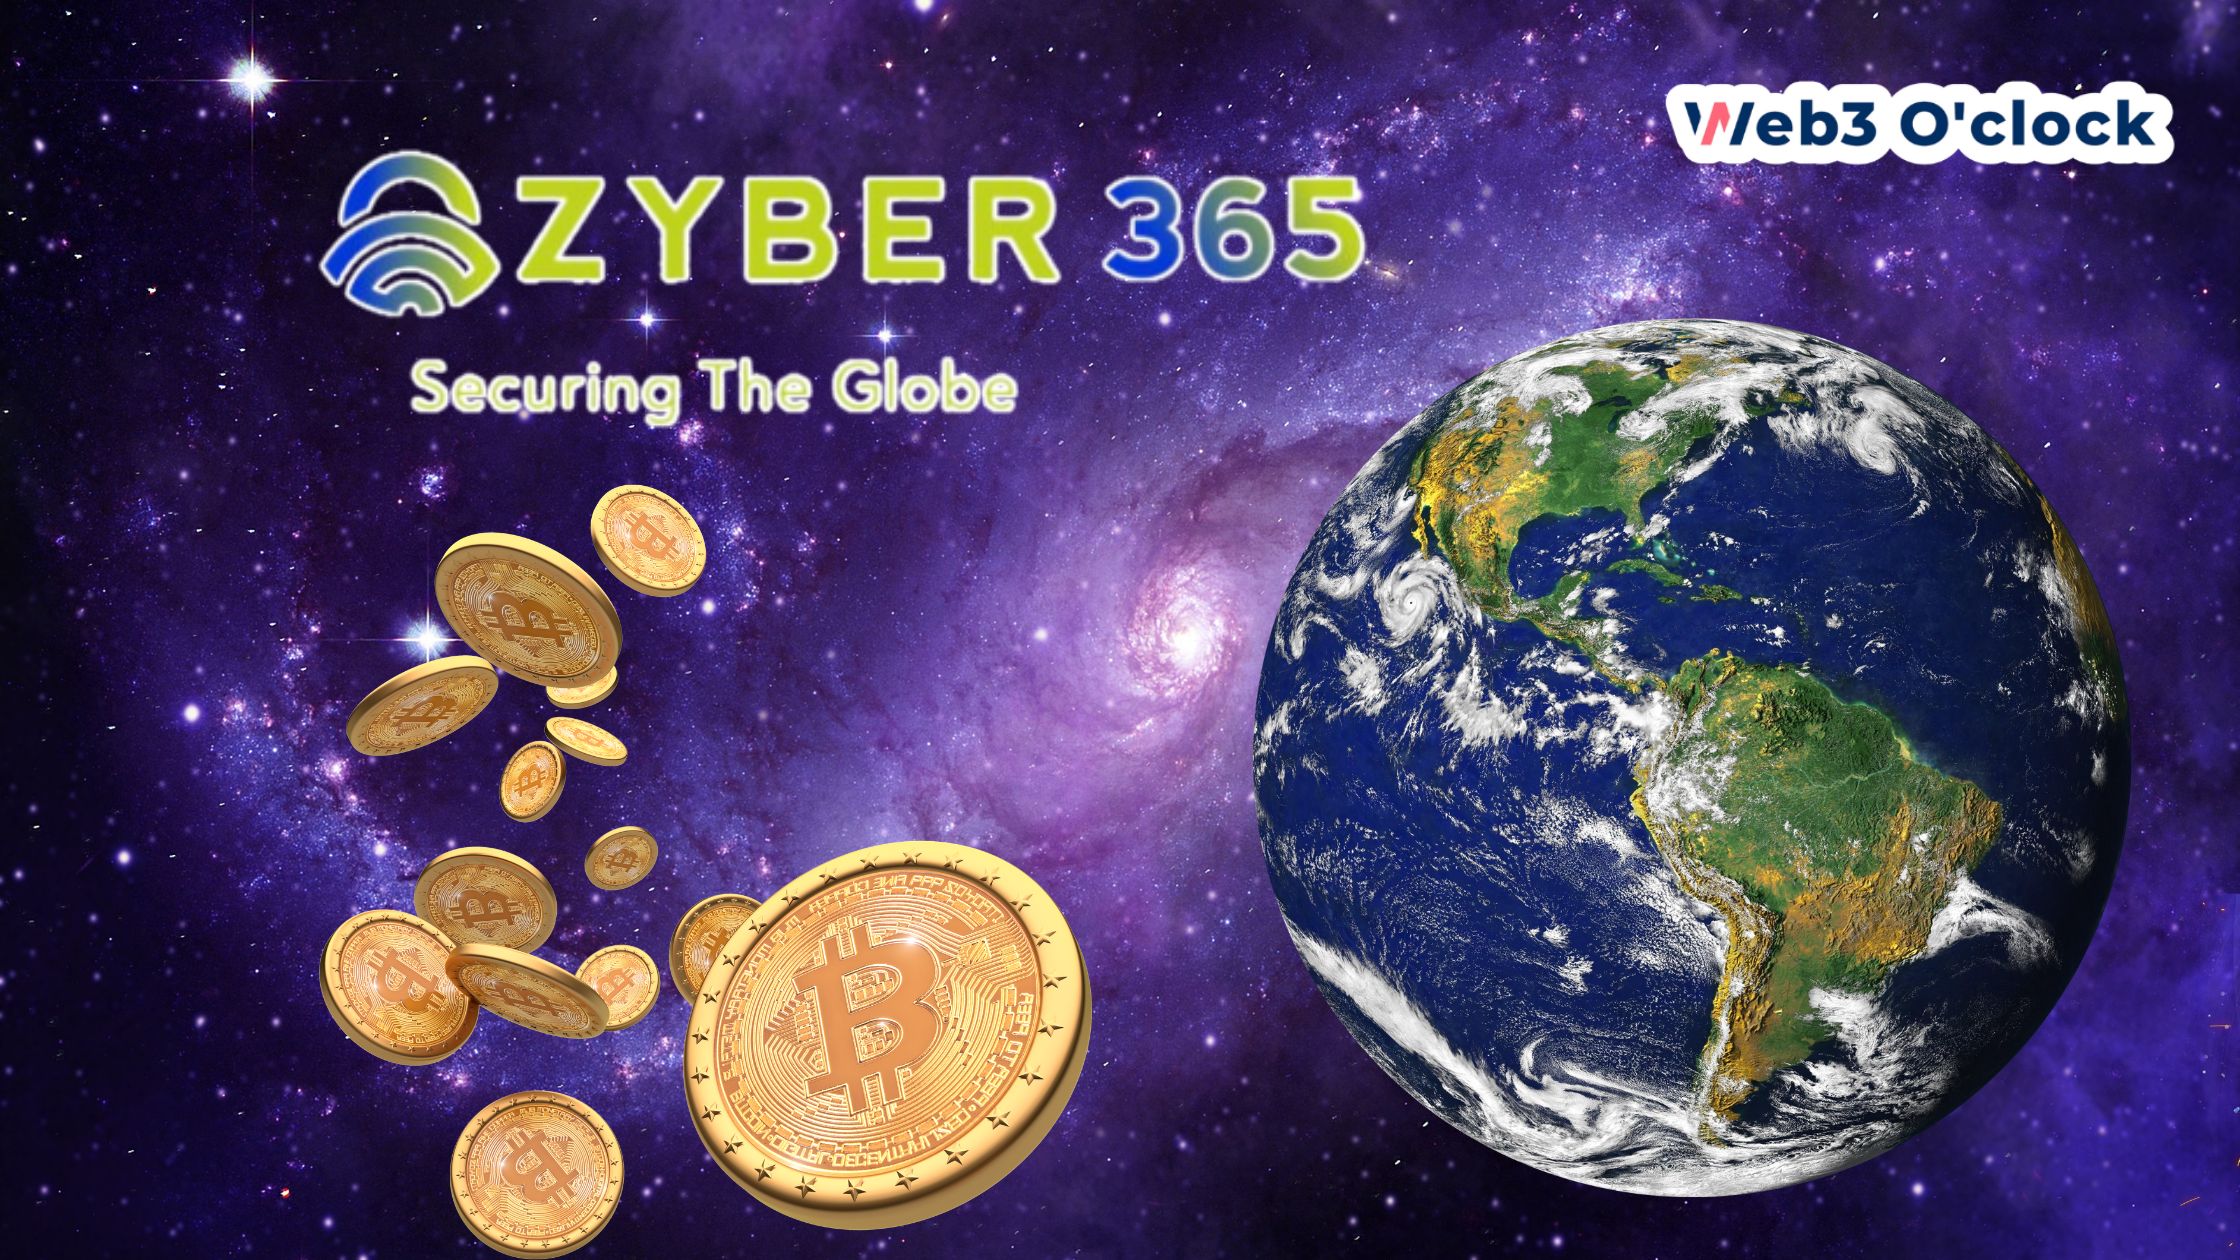 Zyber 365 India's Two-Month-Old Web3 Startup